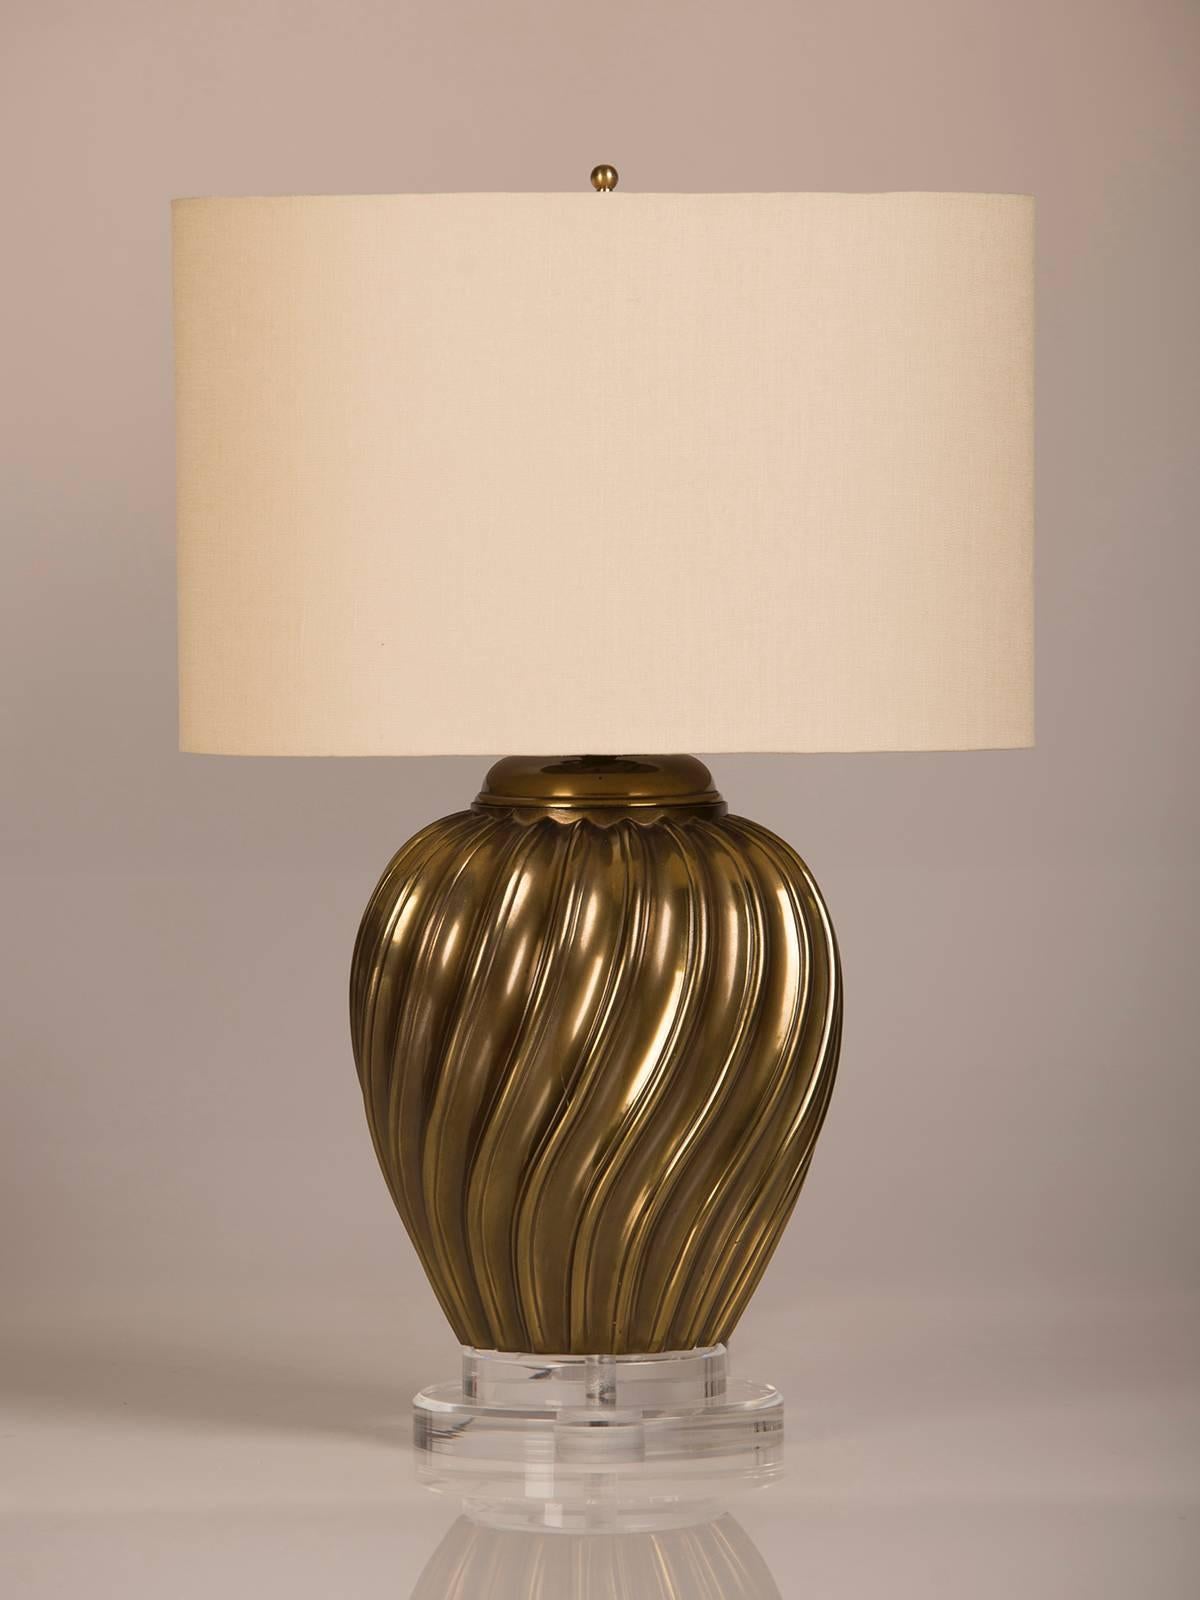 Pair of Italian Vintage Brass Swirl Vases Mounted as Custom Lamps, circa 1950 For Sale 2